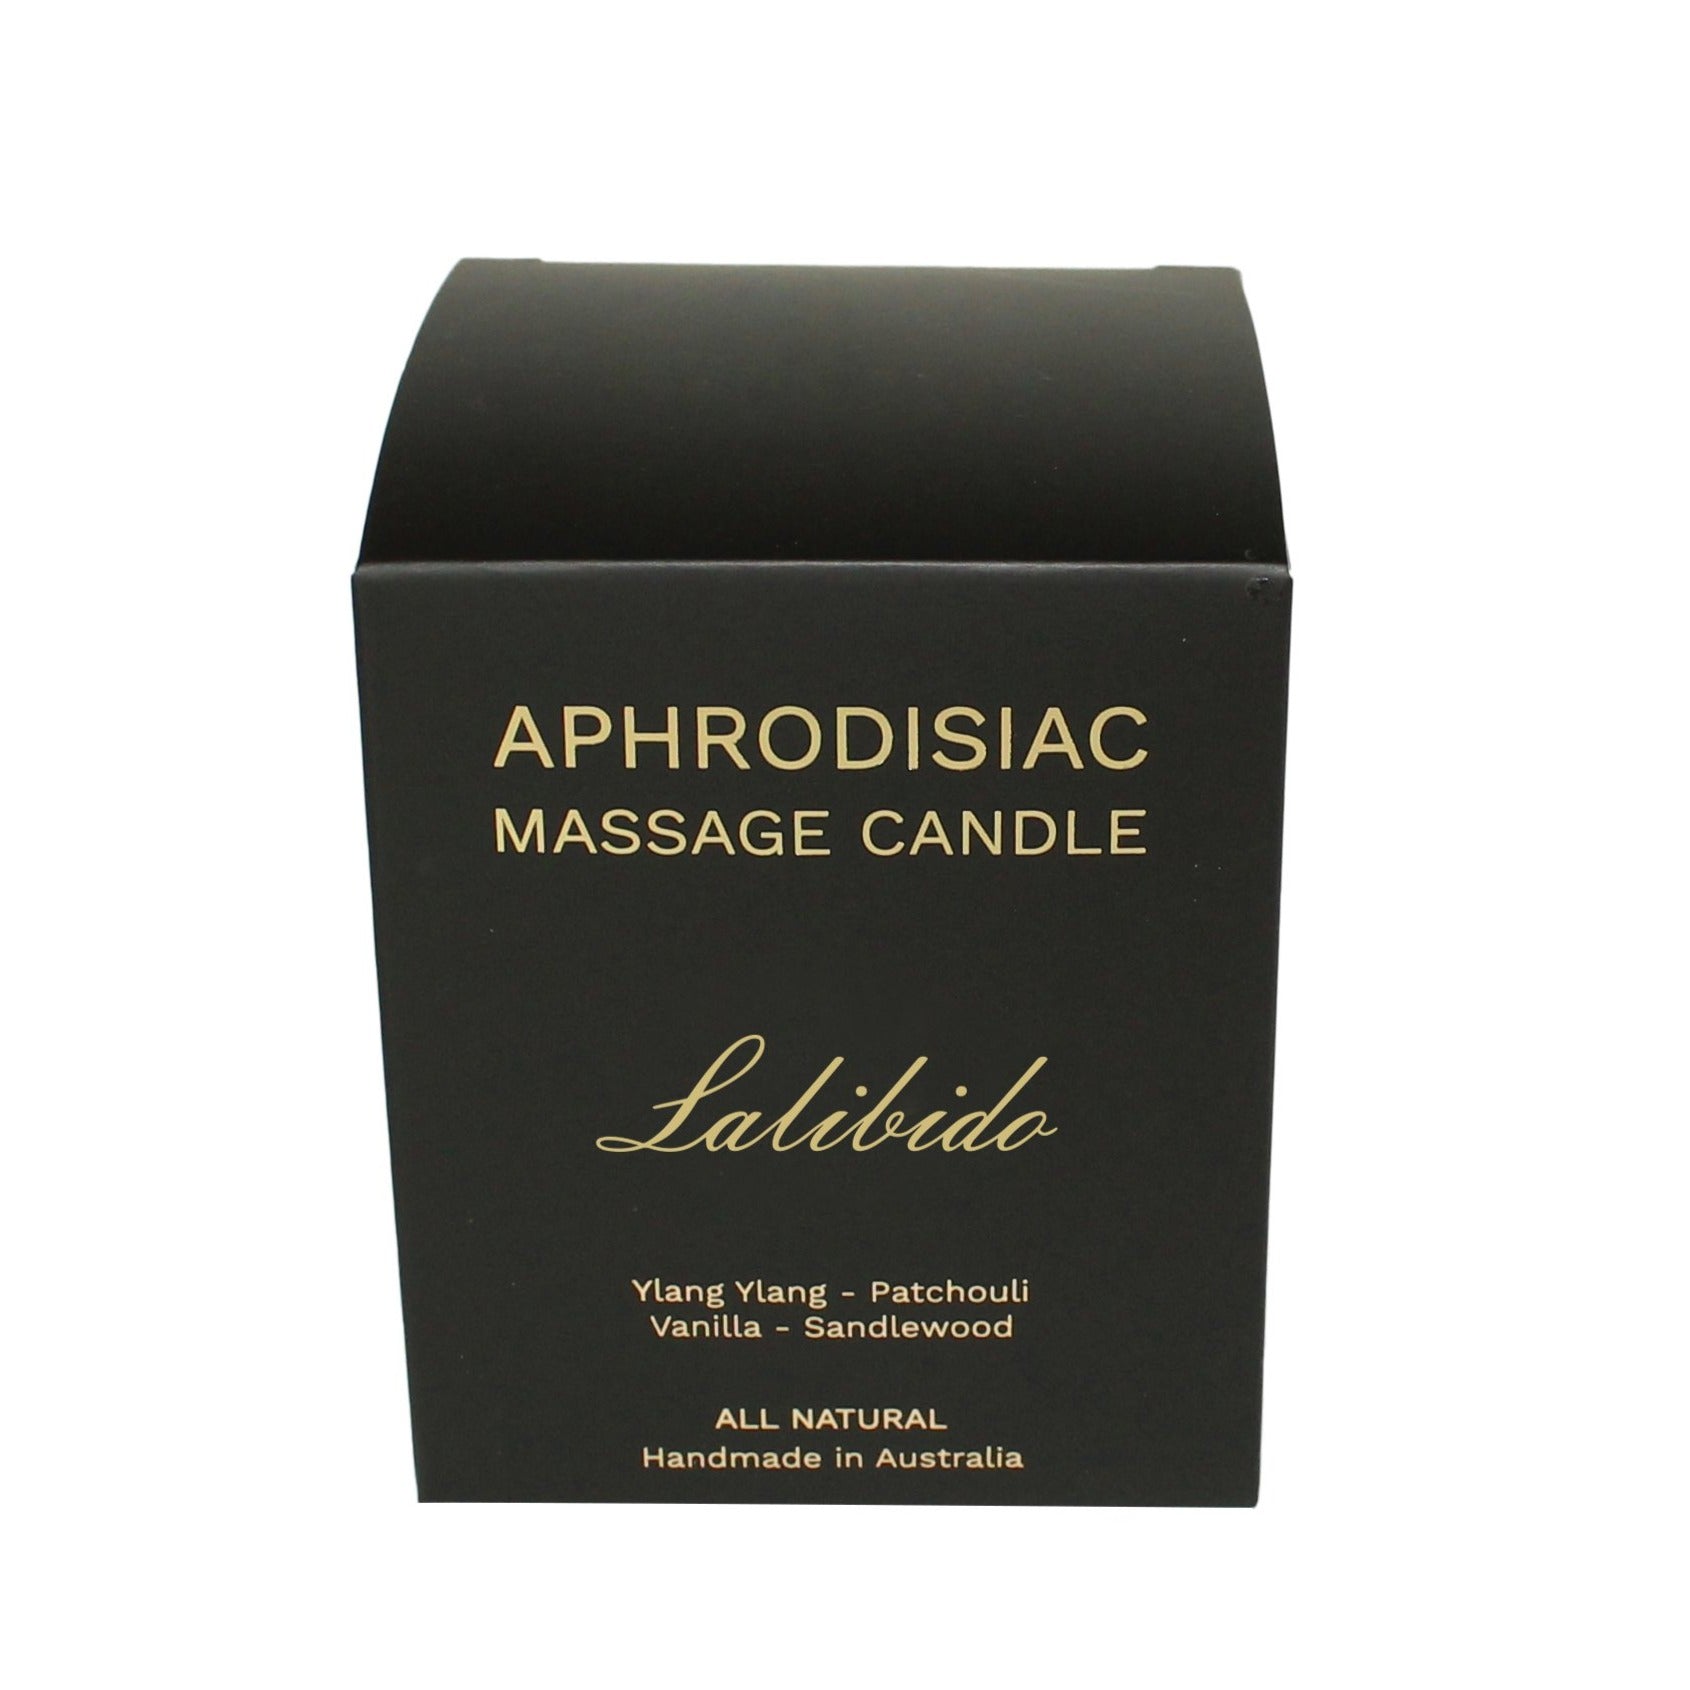 Massage Oil Candle, Massage Candle, Body Oil Candle | Aphrodisiac Blend | Enjoy 5-8 Full Body Massage Treatments | All Natural